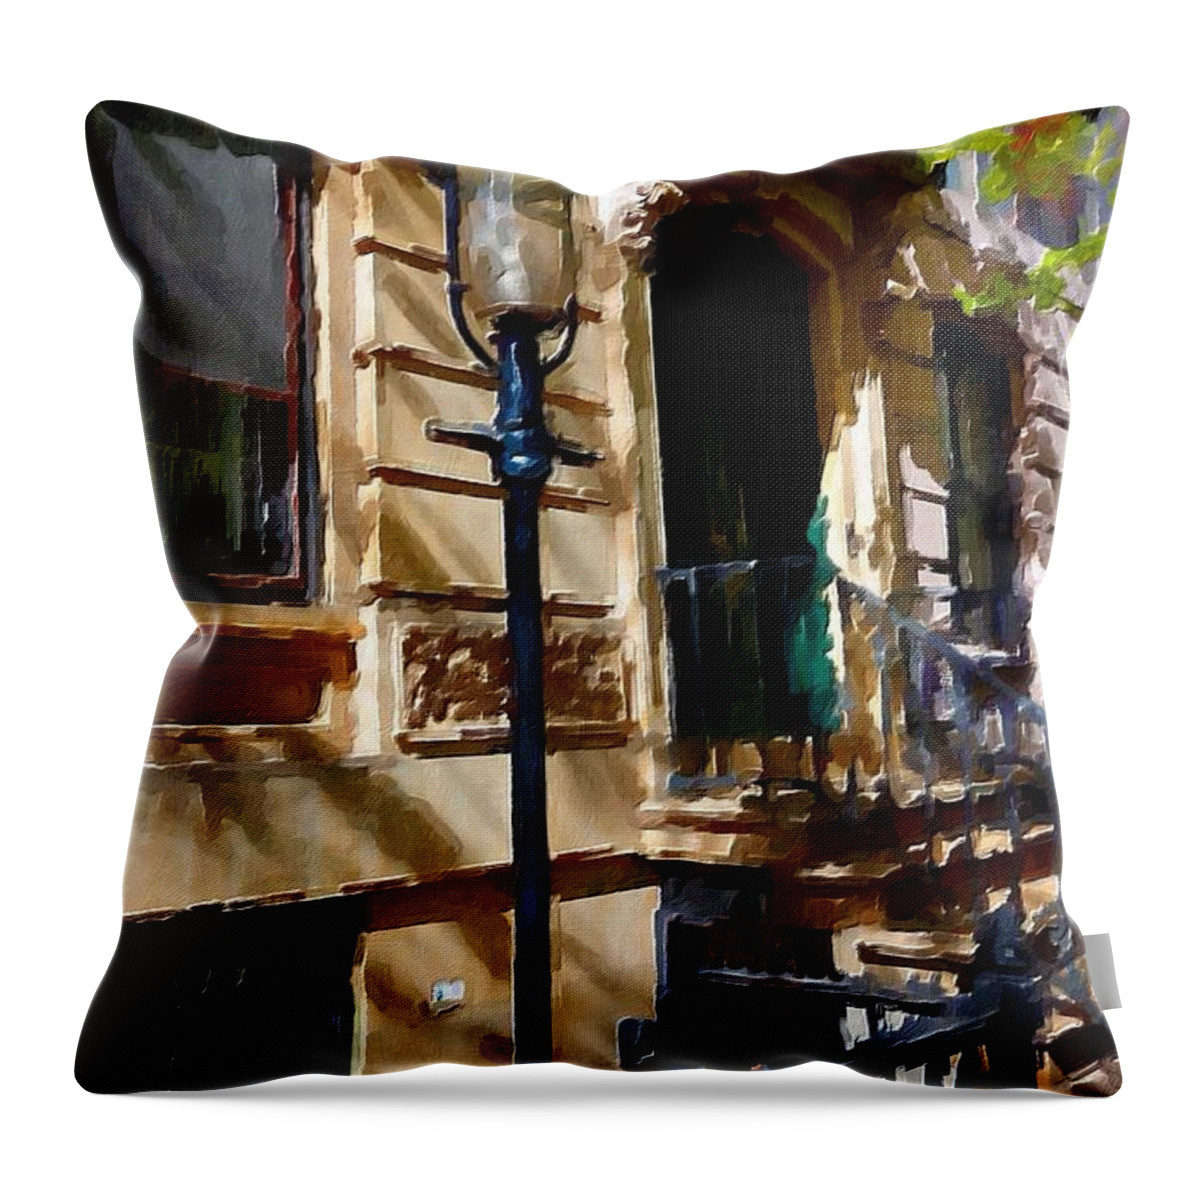 New York City Pre War Buildings Throw Pillow featuring the photograph East Village New York Townhouse by Joan Reese